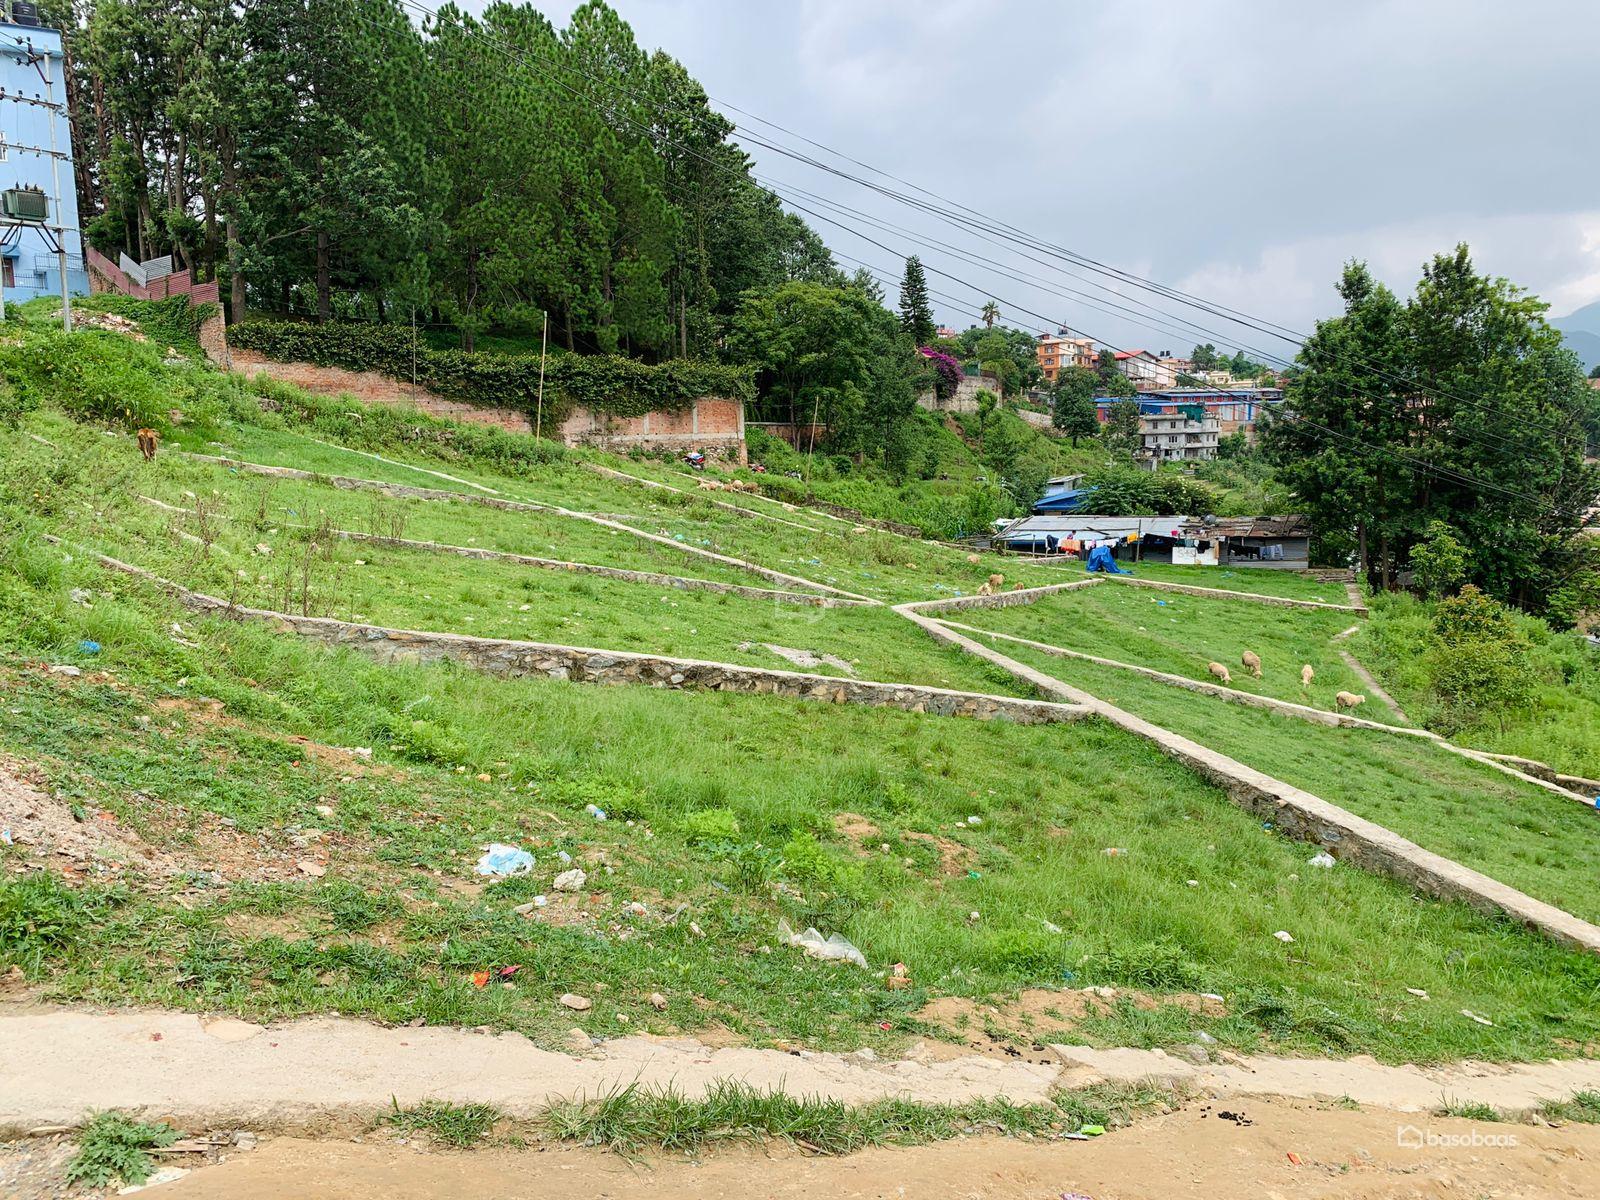 Residental Land : Land for Sale in Bhaisepati, Lalitpur Image 4